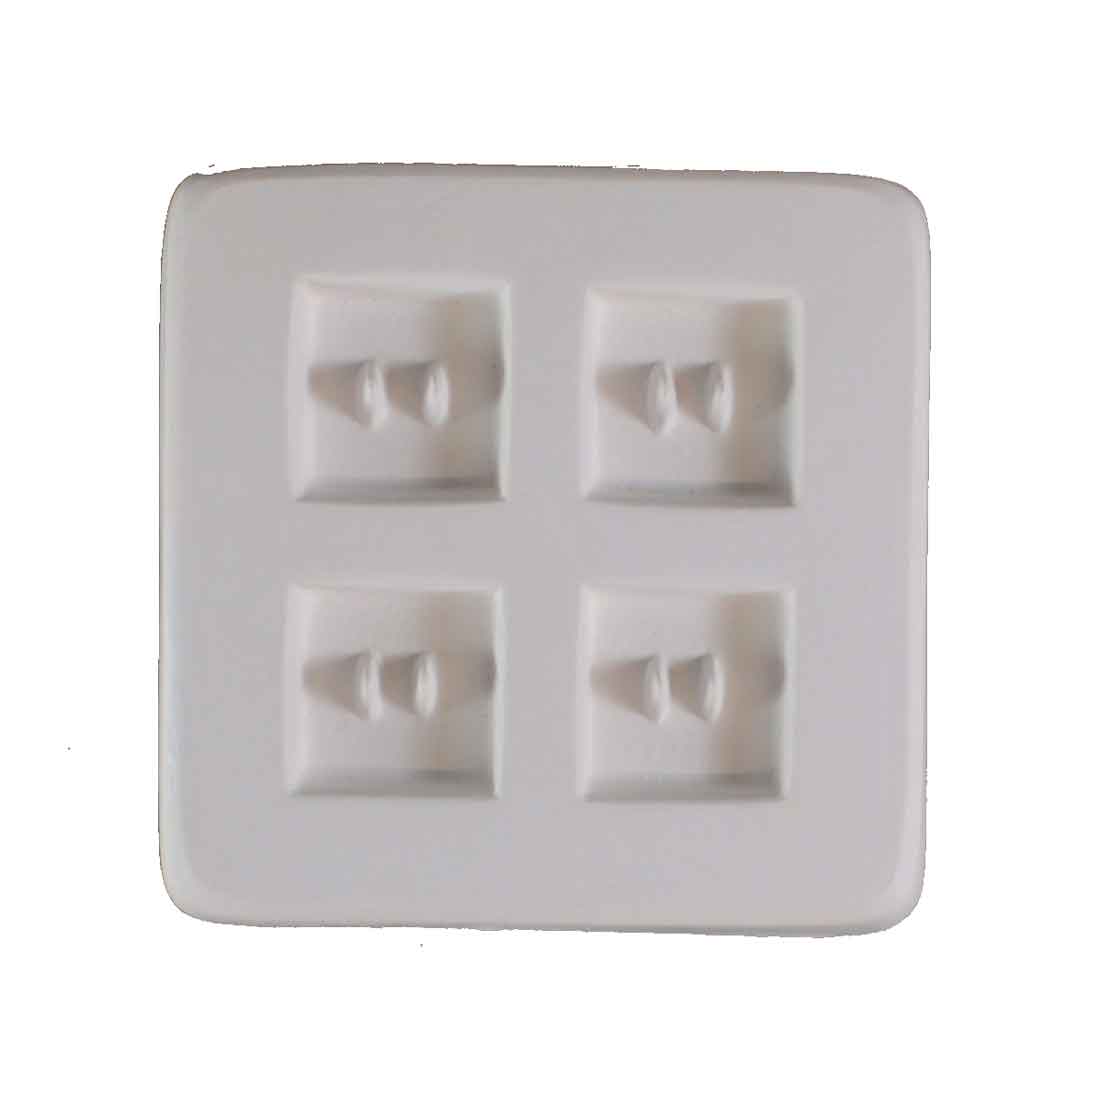 HOLEY SMALL SQUARE BUTTONS - 4 by CPI